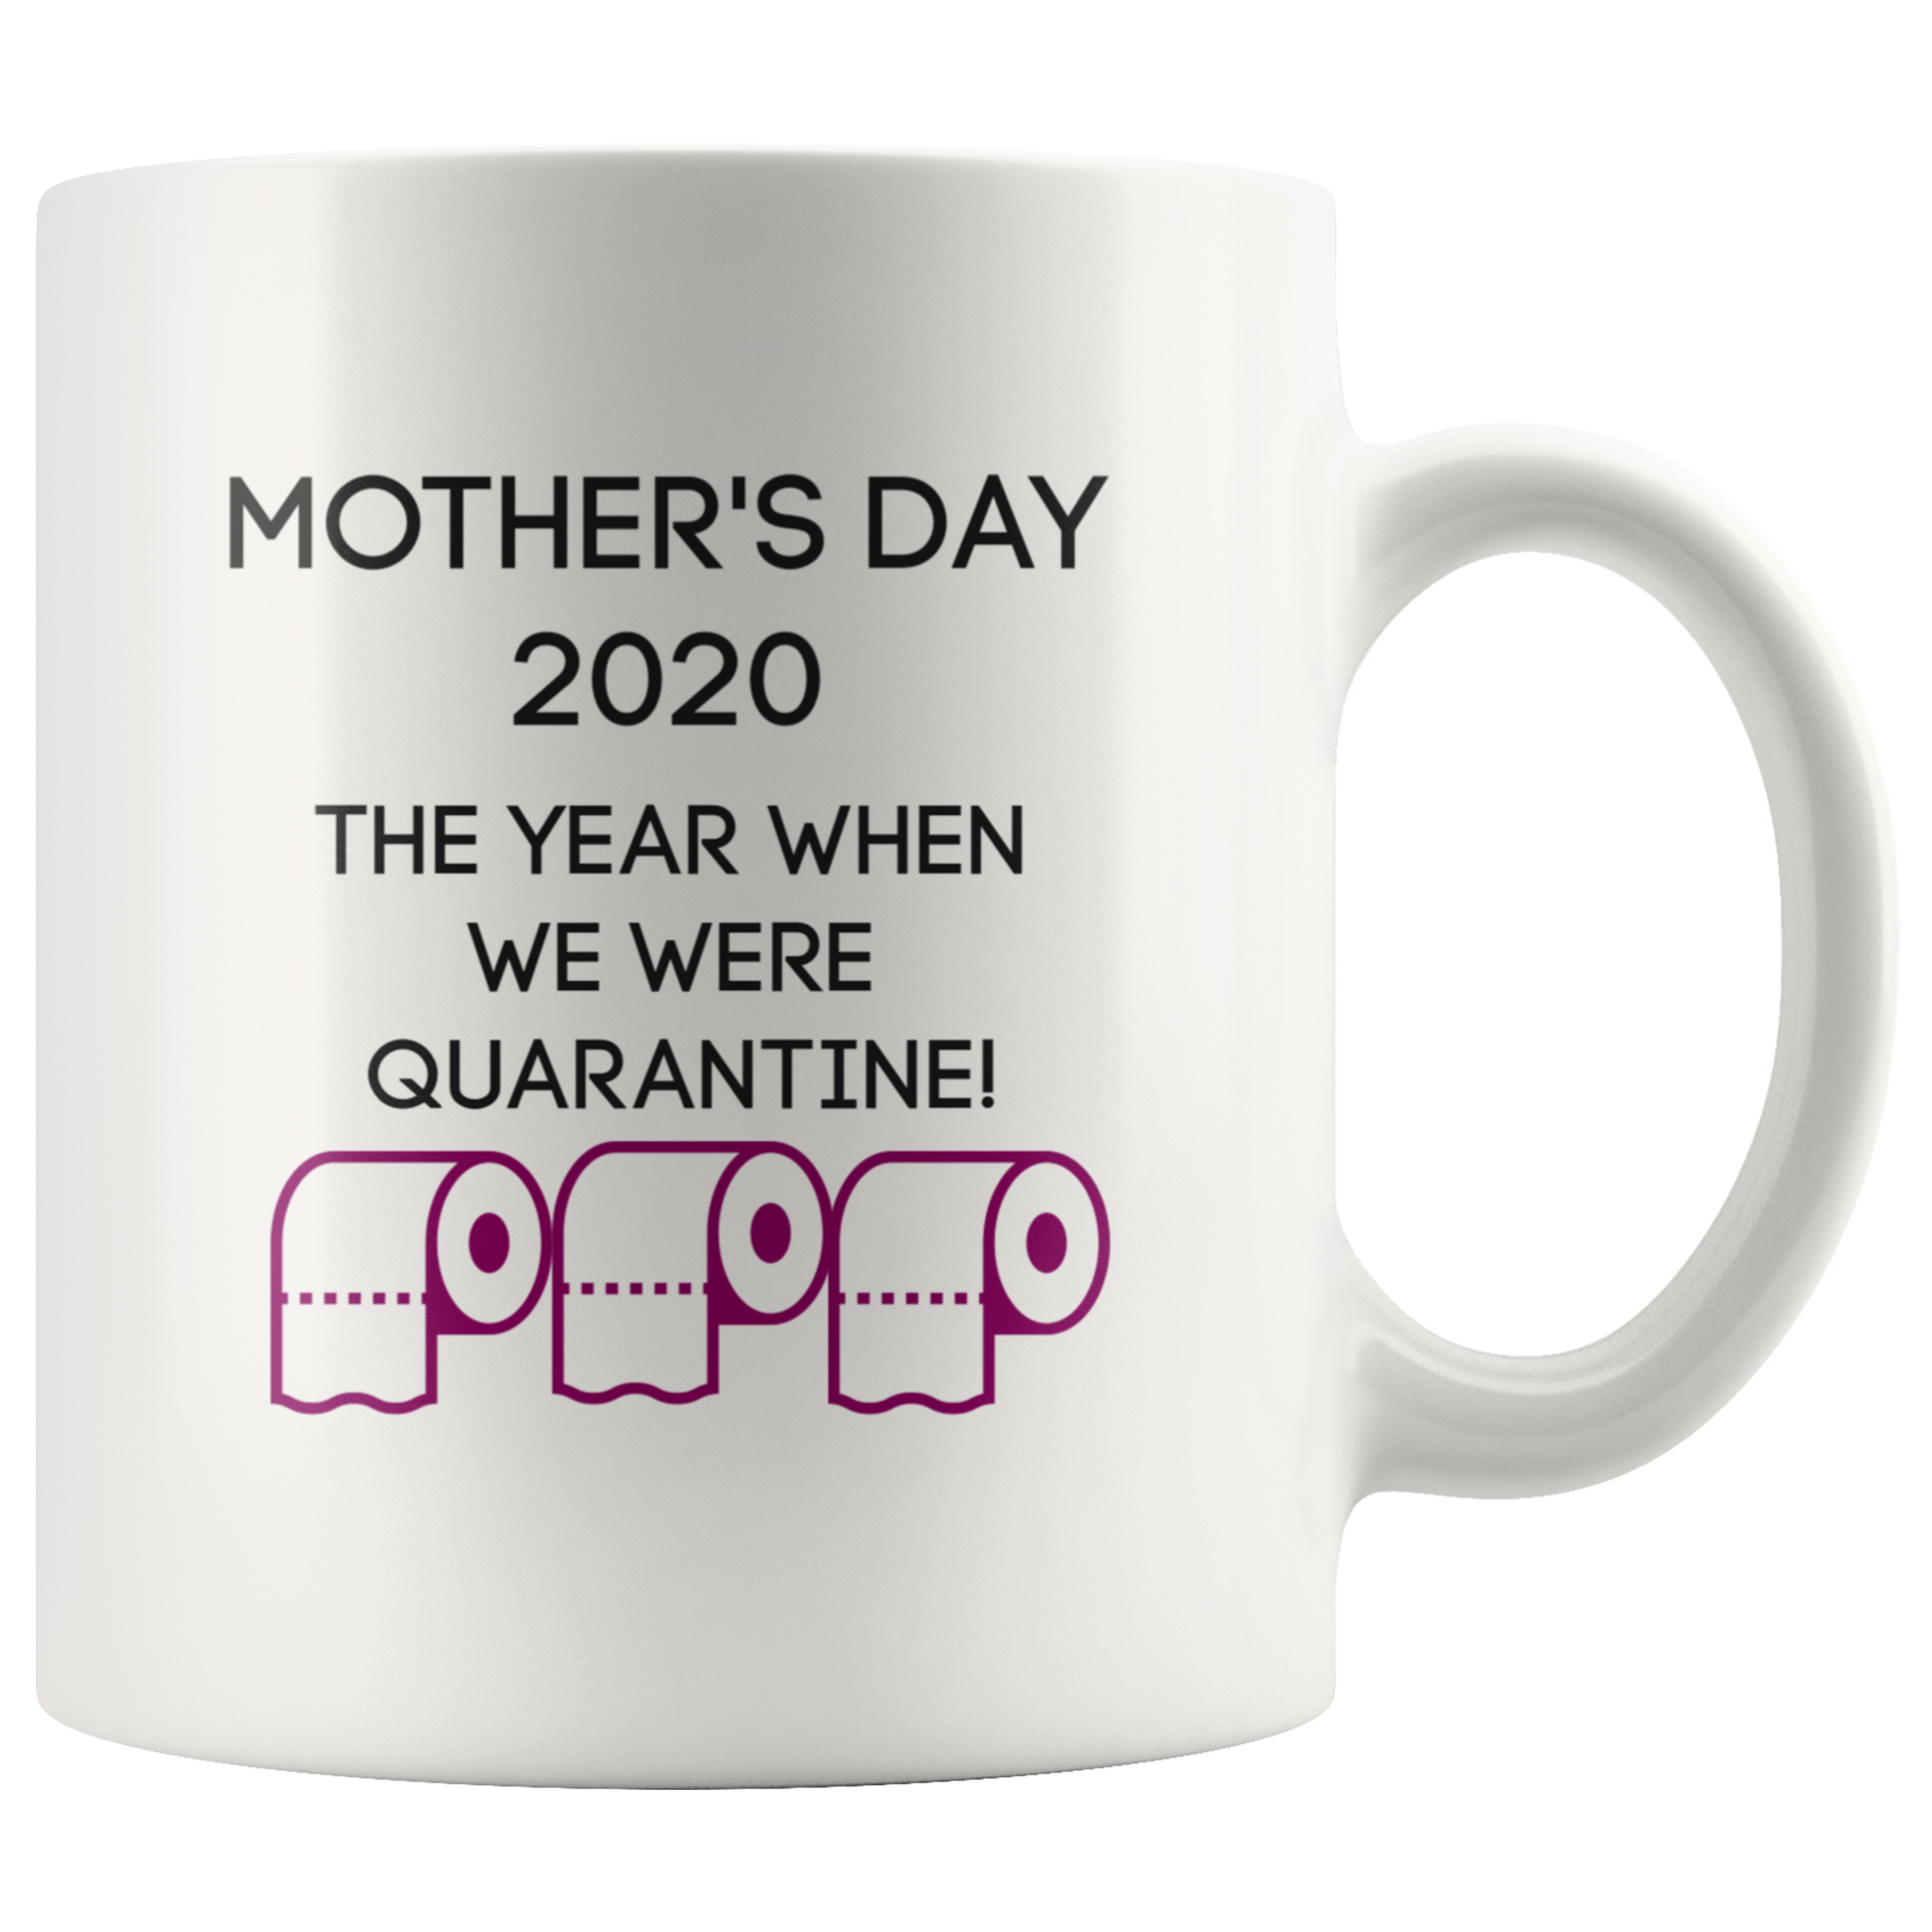 Mothers Day Gift From Daughter Gifts For Mom Funny Mom Giftmom Mug